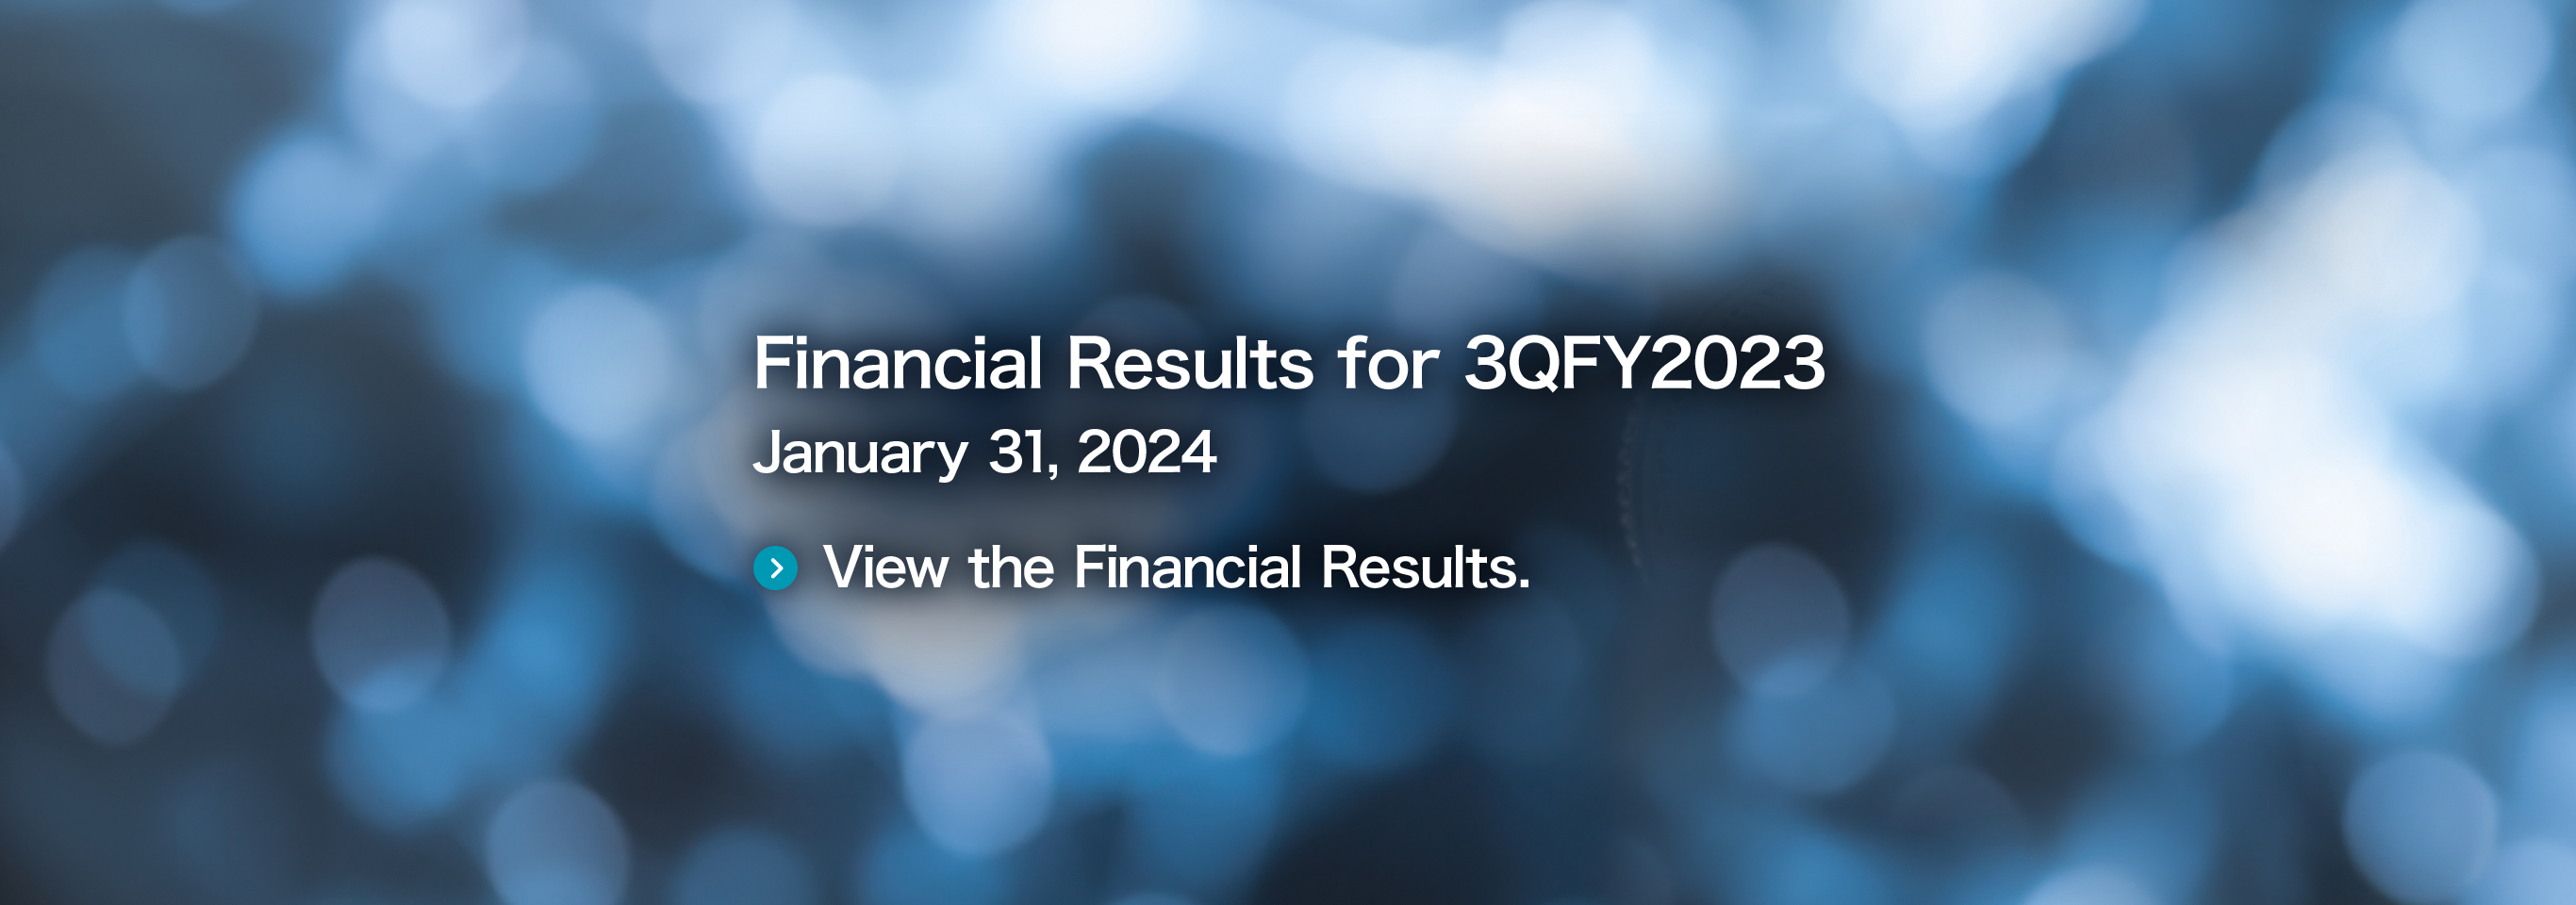 Investor Meeting on Financial Results for FY2022 May 19, 2023 View the Presentation Materials.